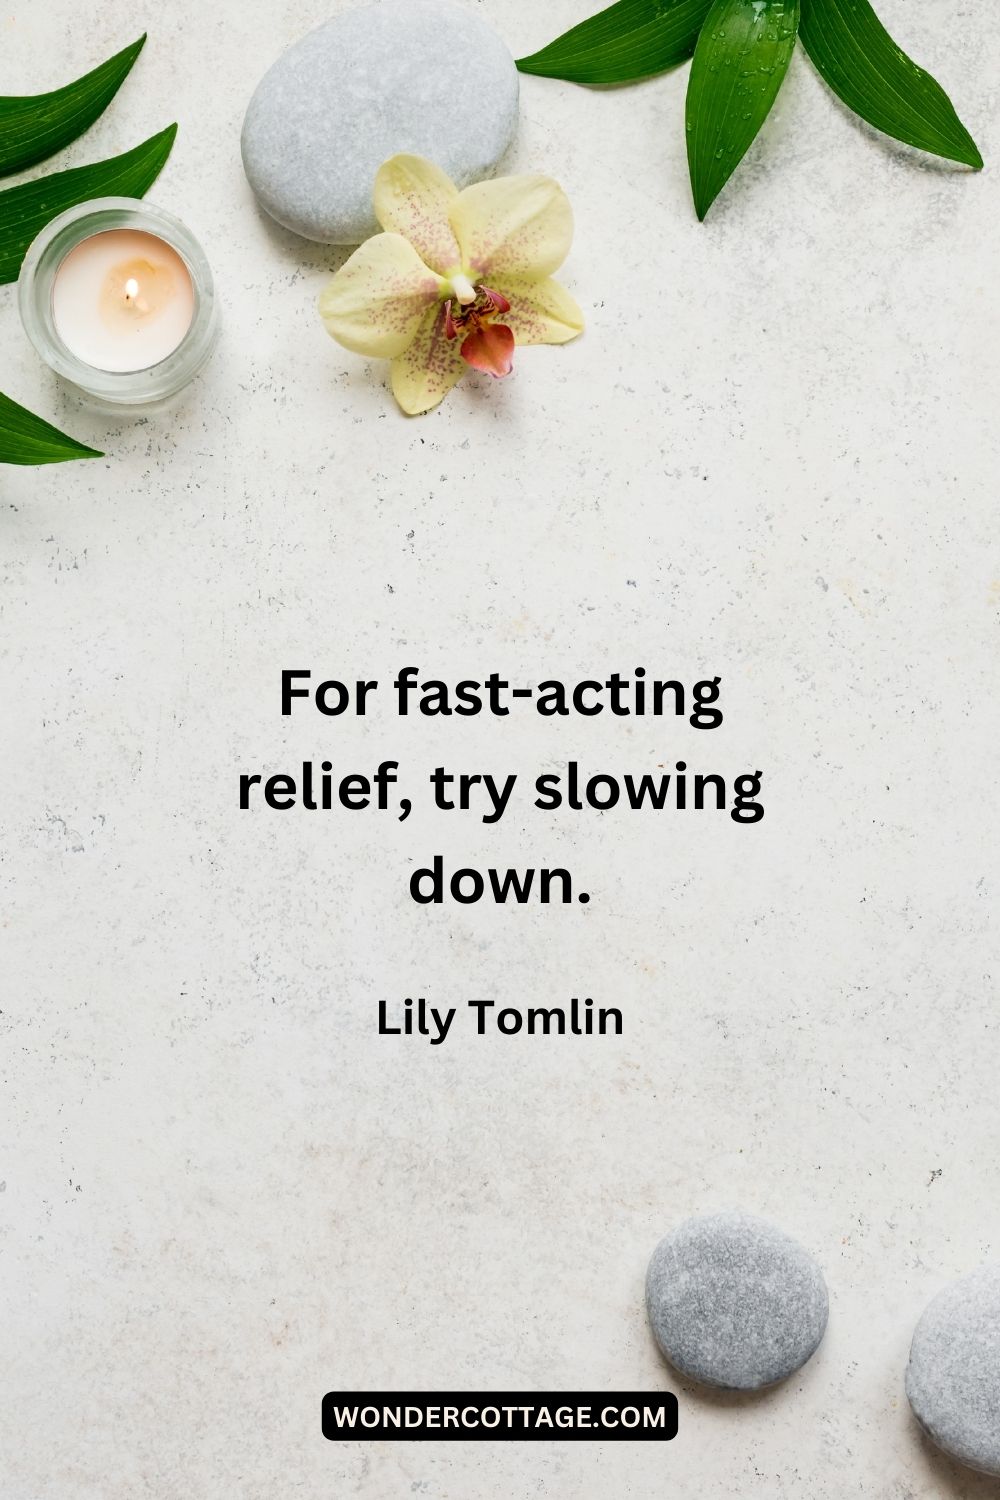 For fast-acting relief, try slowing down. Lily Tomlin